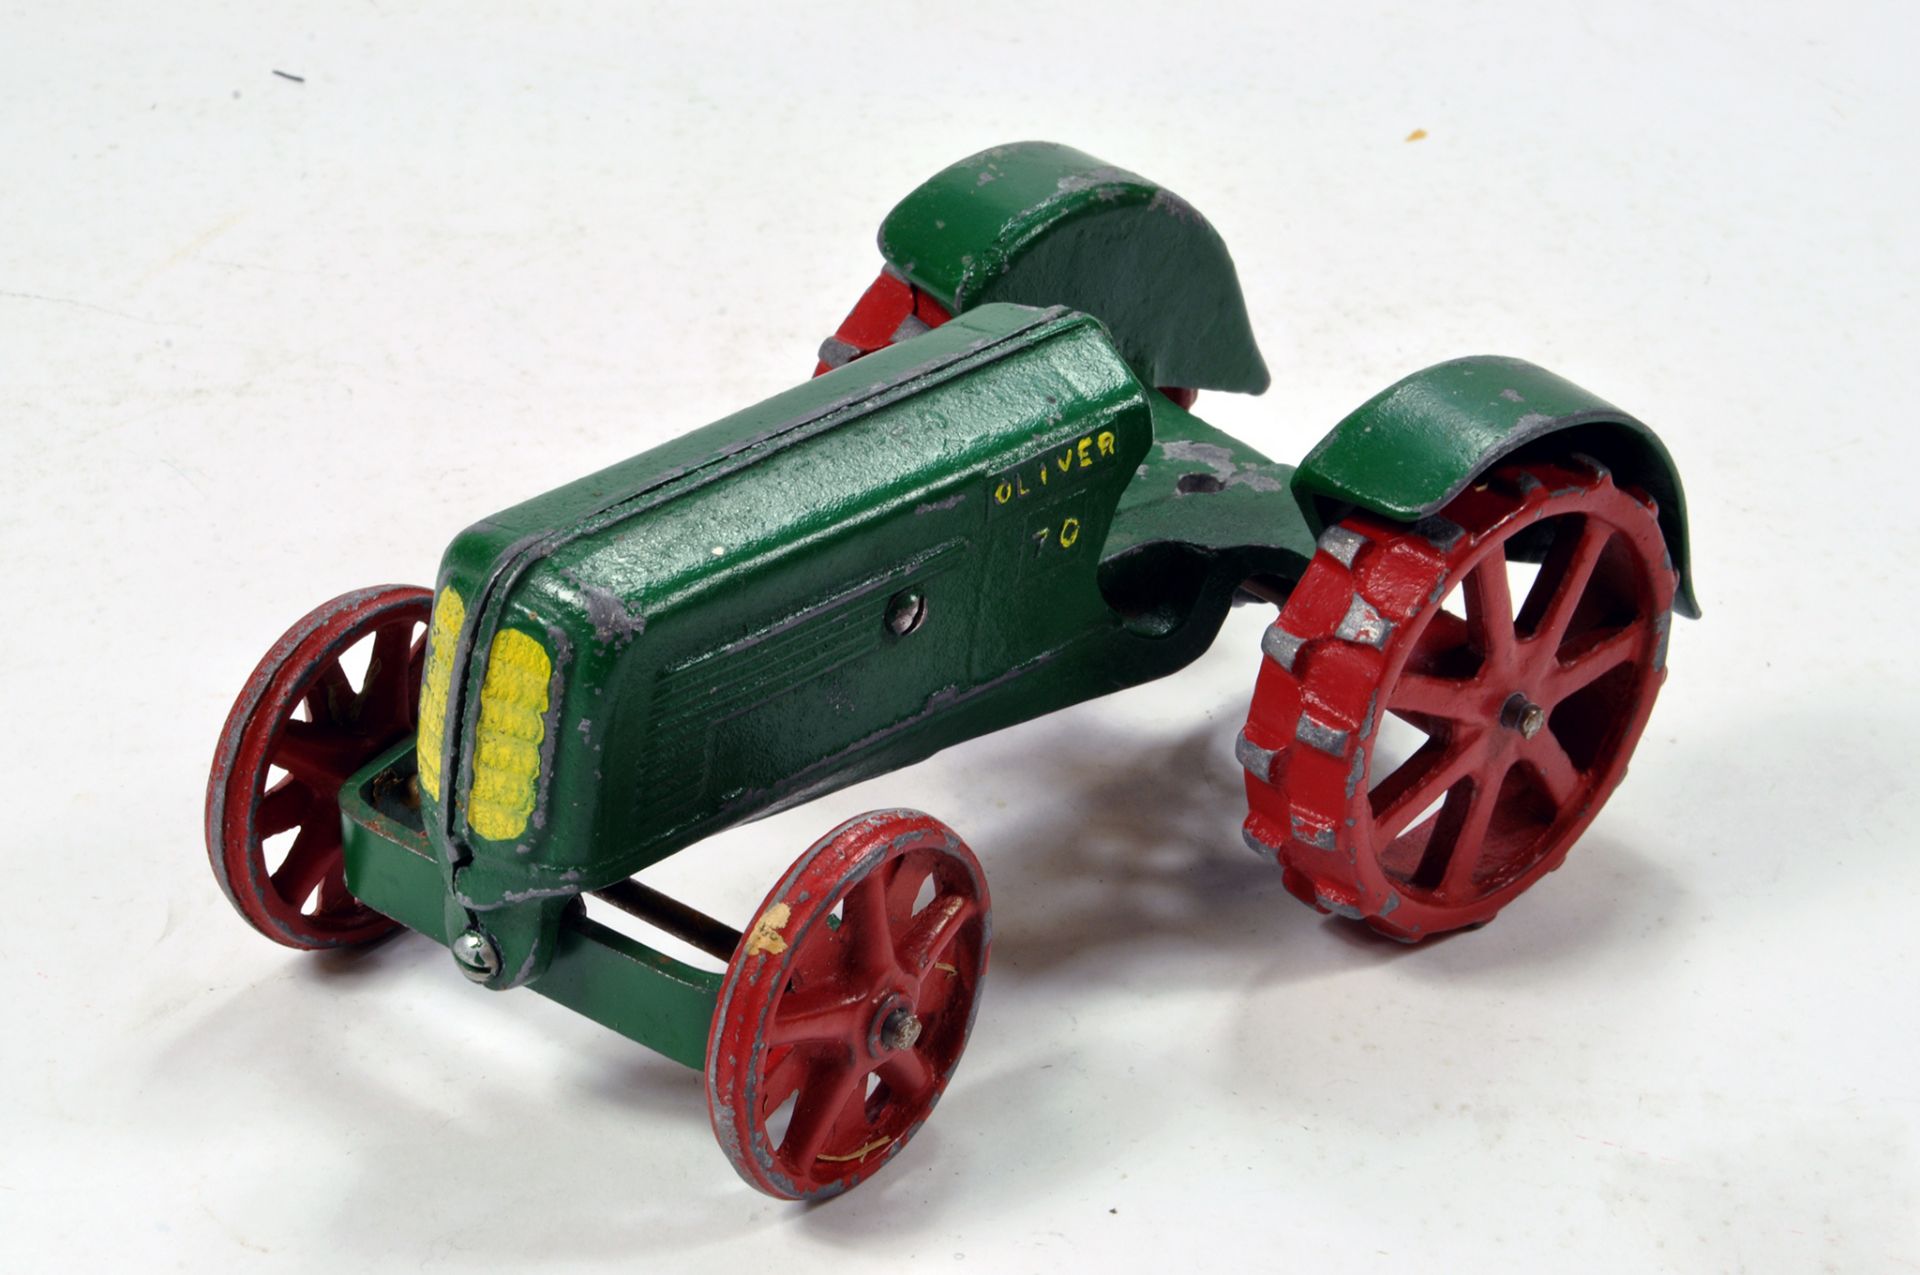 A very rare issue in approx 1/16 of the Oliver 70 Tractor with Steel Wheels.